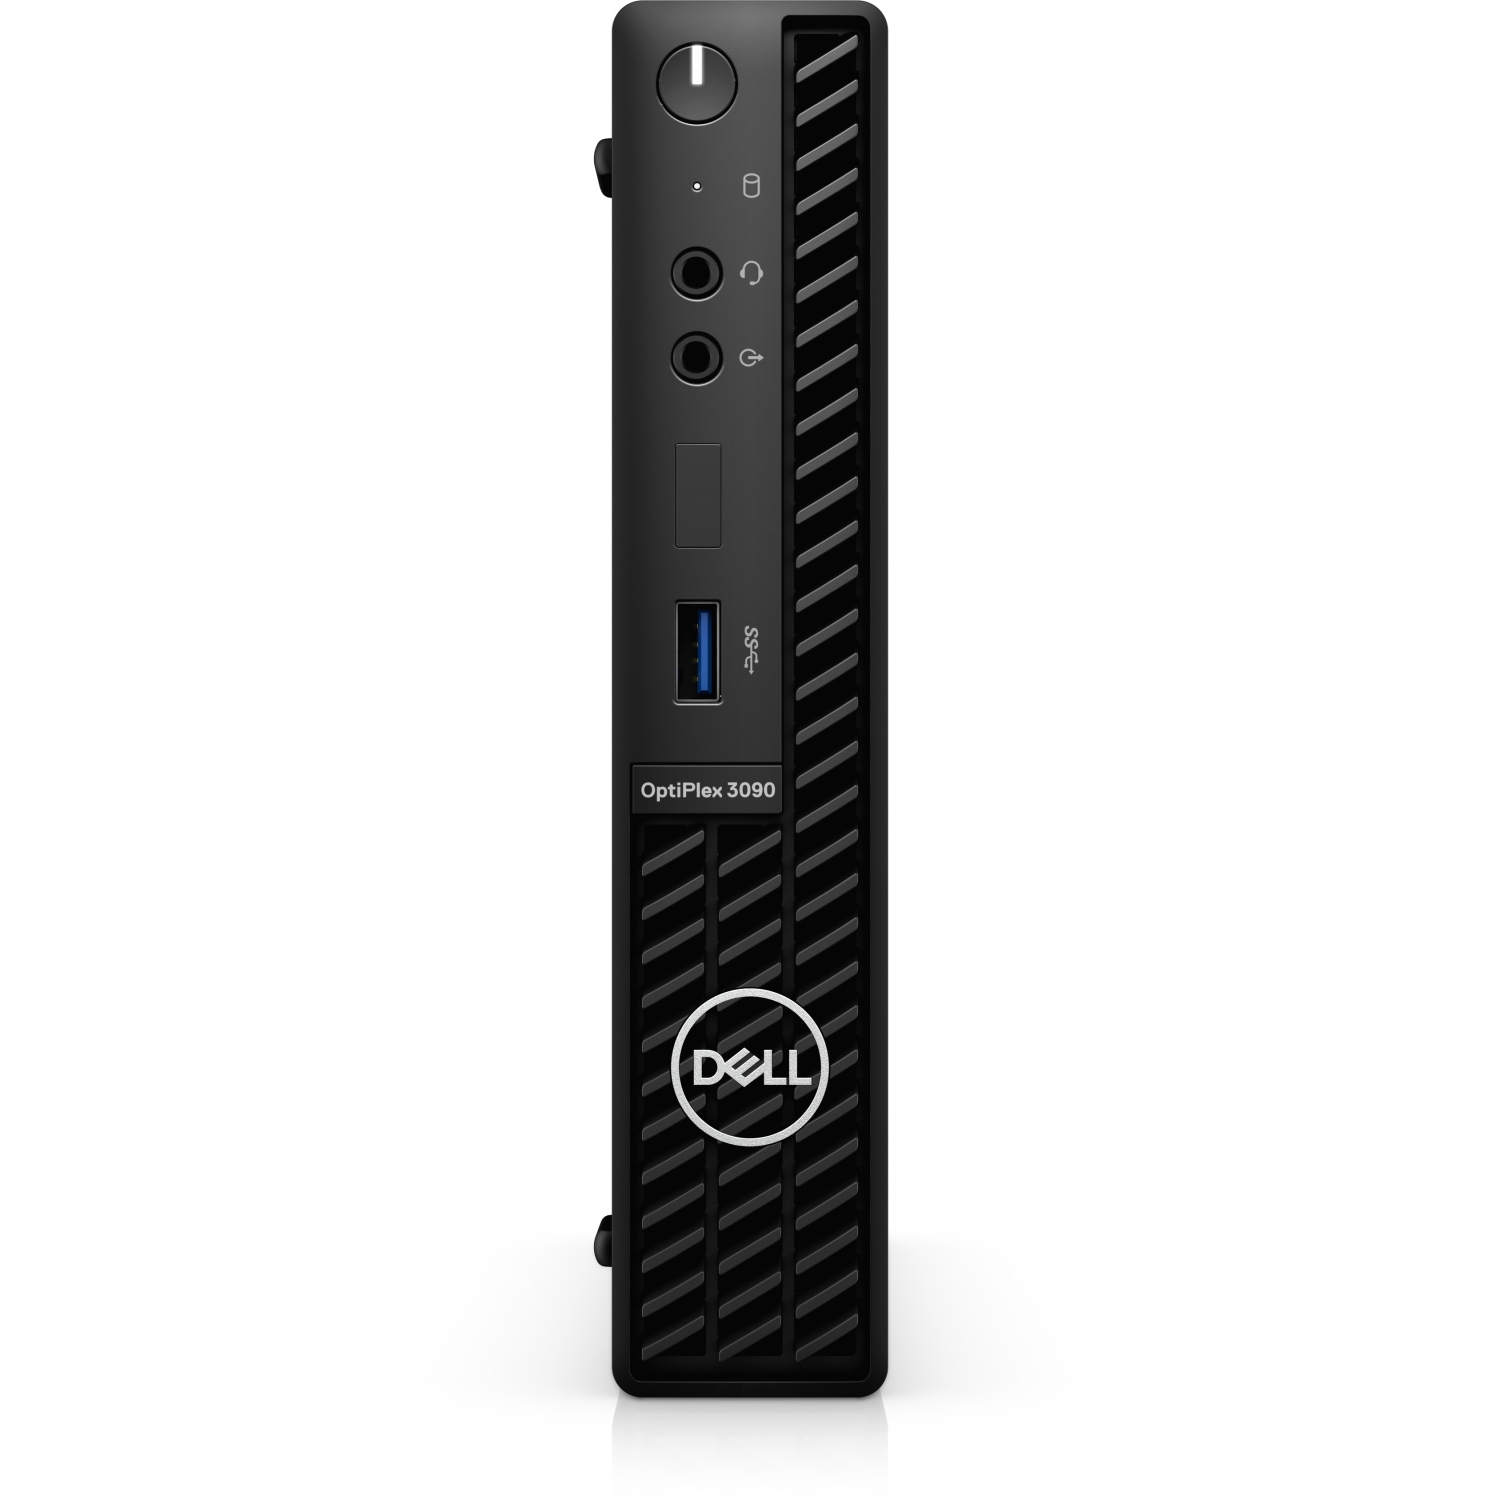 Refurbished (Excellent) – Dell Optiplex 3000 3090 Micro Tower Desktop (2021) | Core i5 - 1TB HDD - 8GB RAM | 6 Cores @ 3.8 GHz - 10th Gen CPU